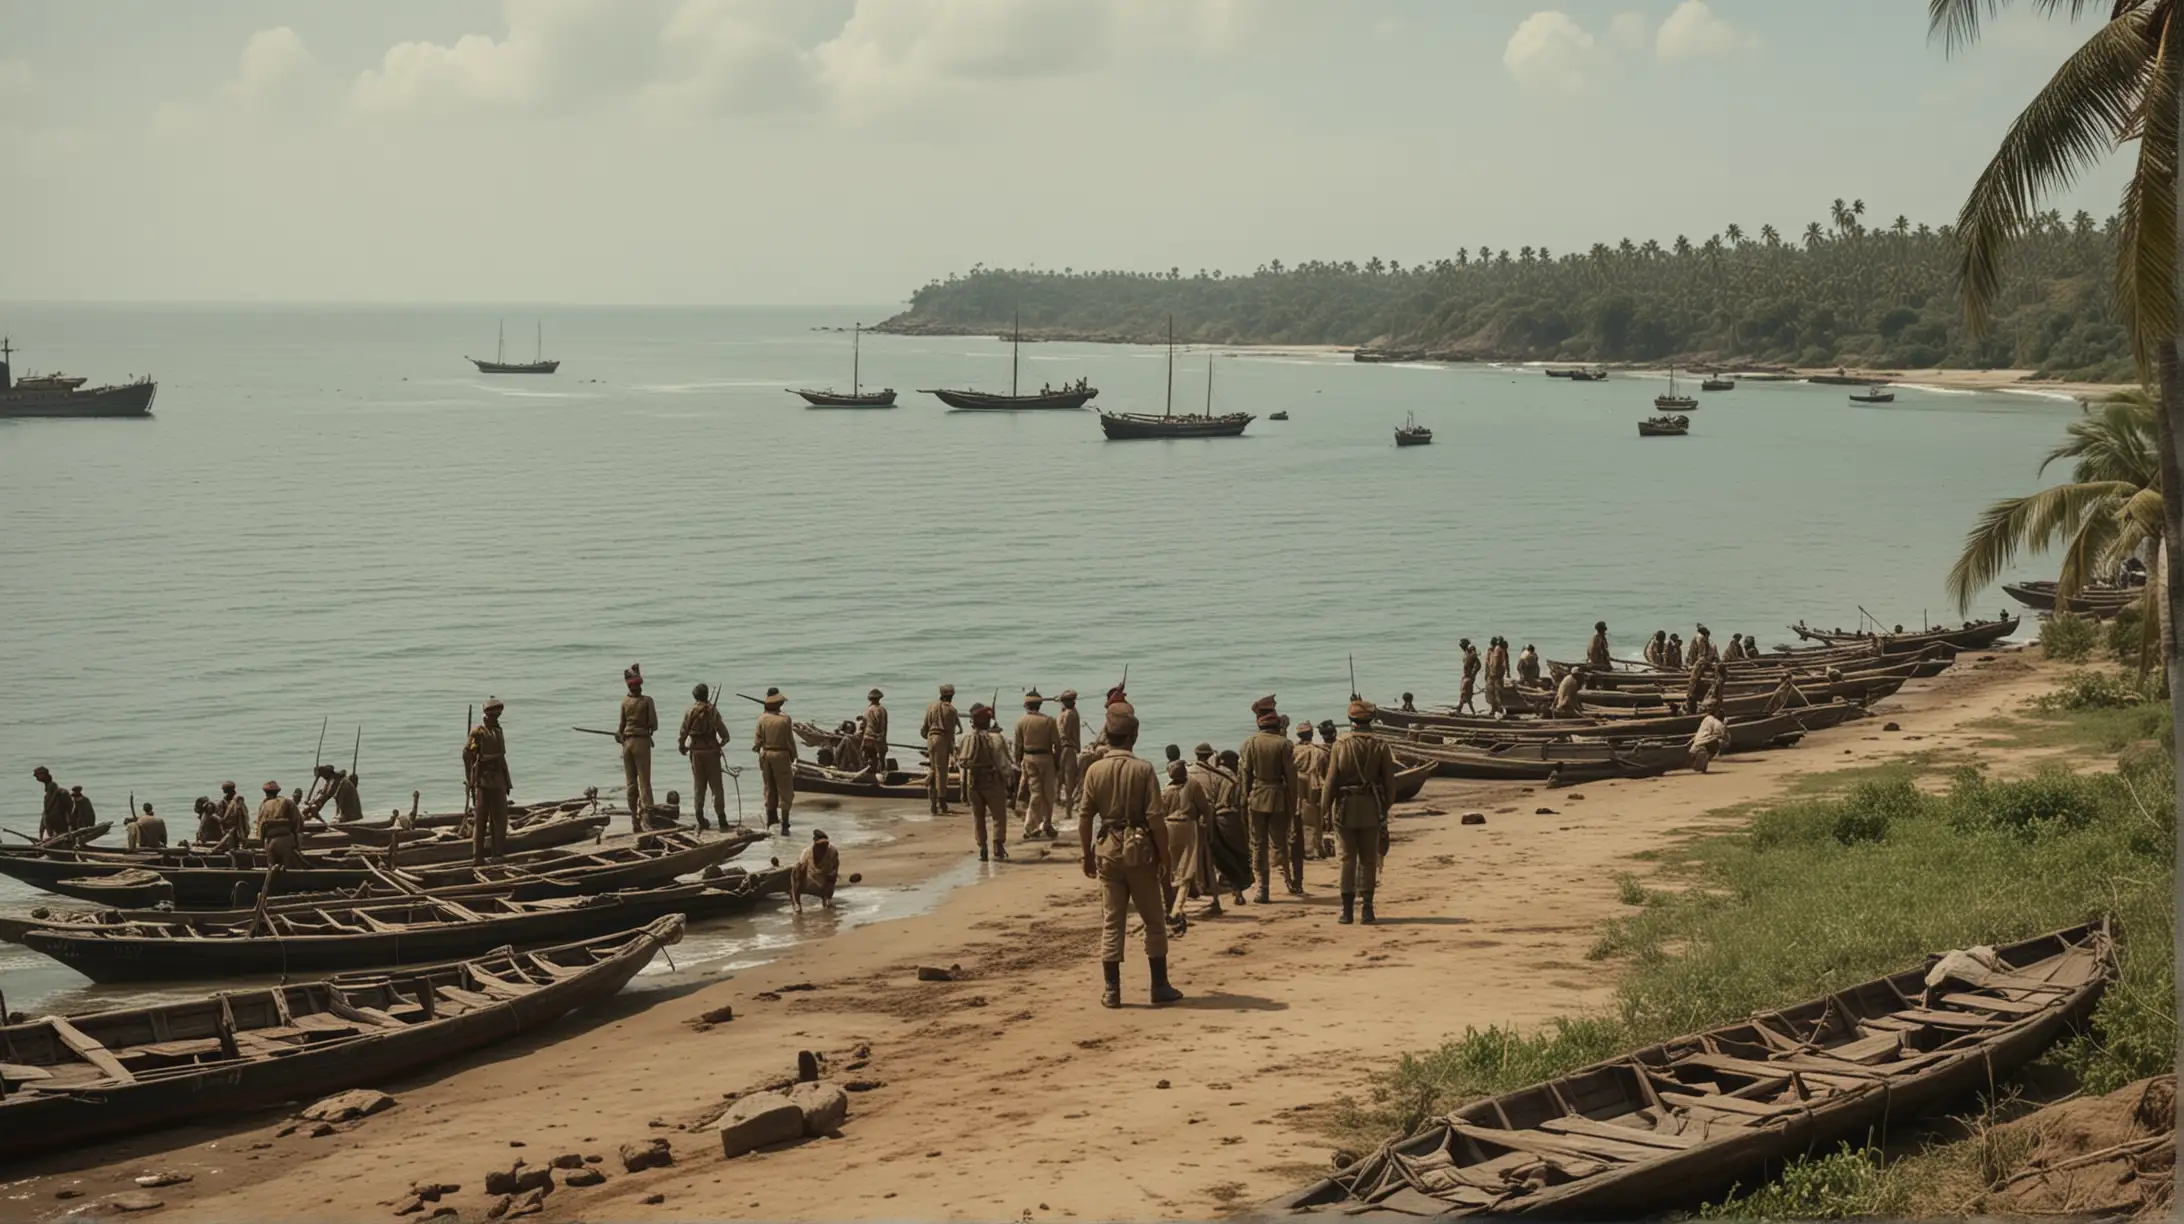 cinematic image of a peninsula, a coastal area in India under colonial rule, British soldiers and Indian civilians, boats, goods, trade. A Man is watching them